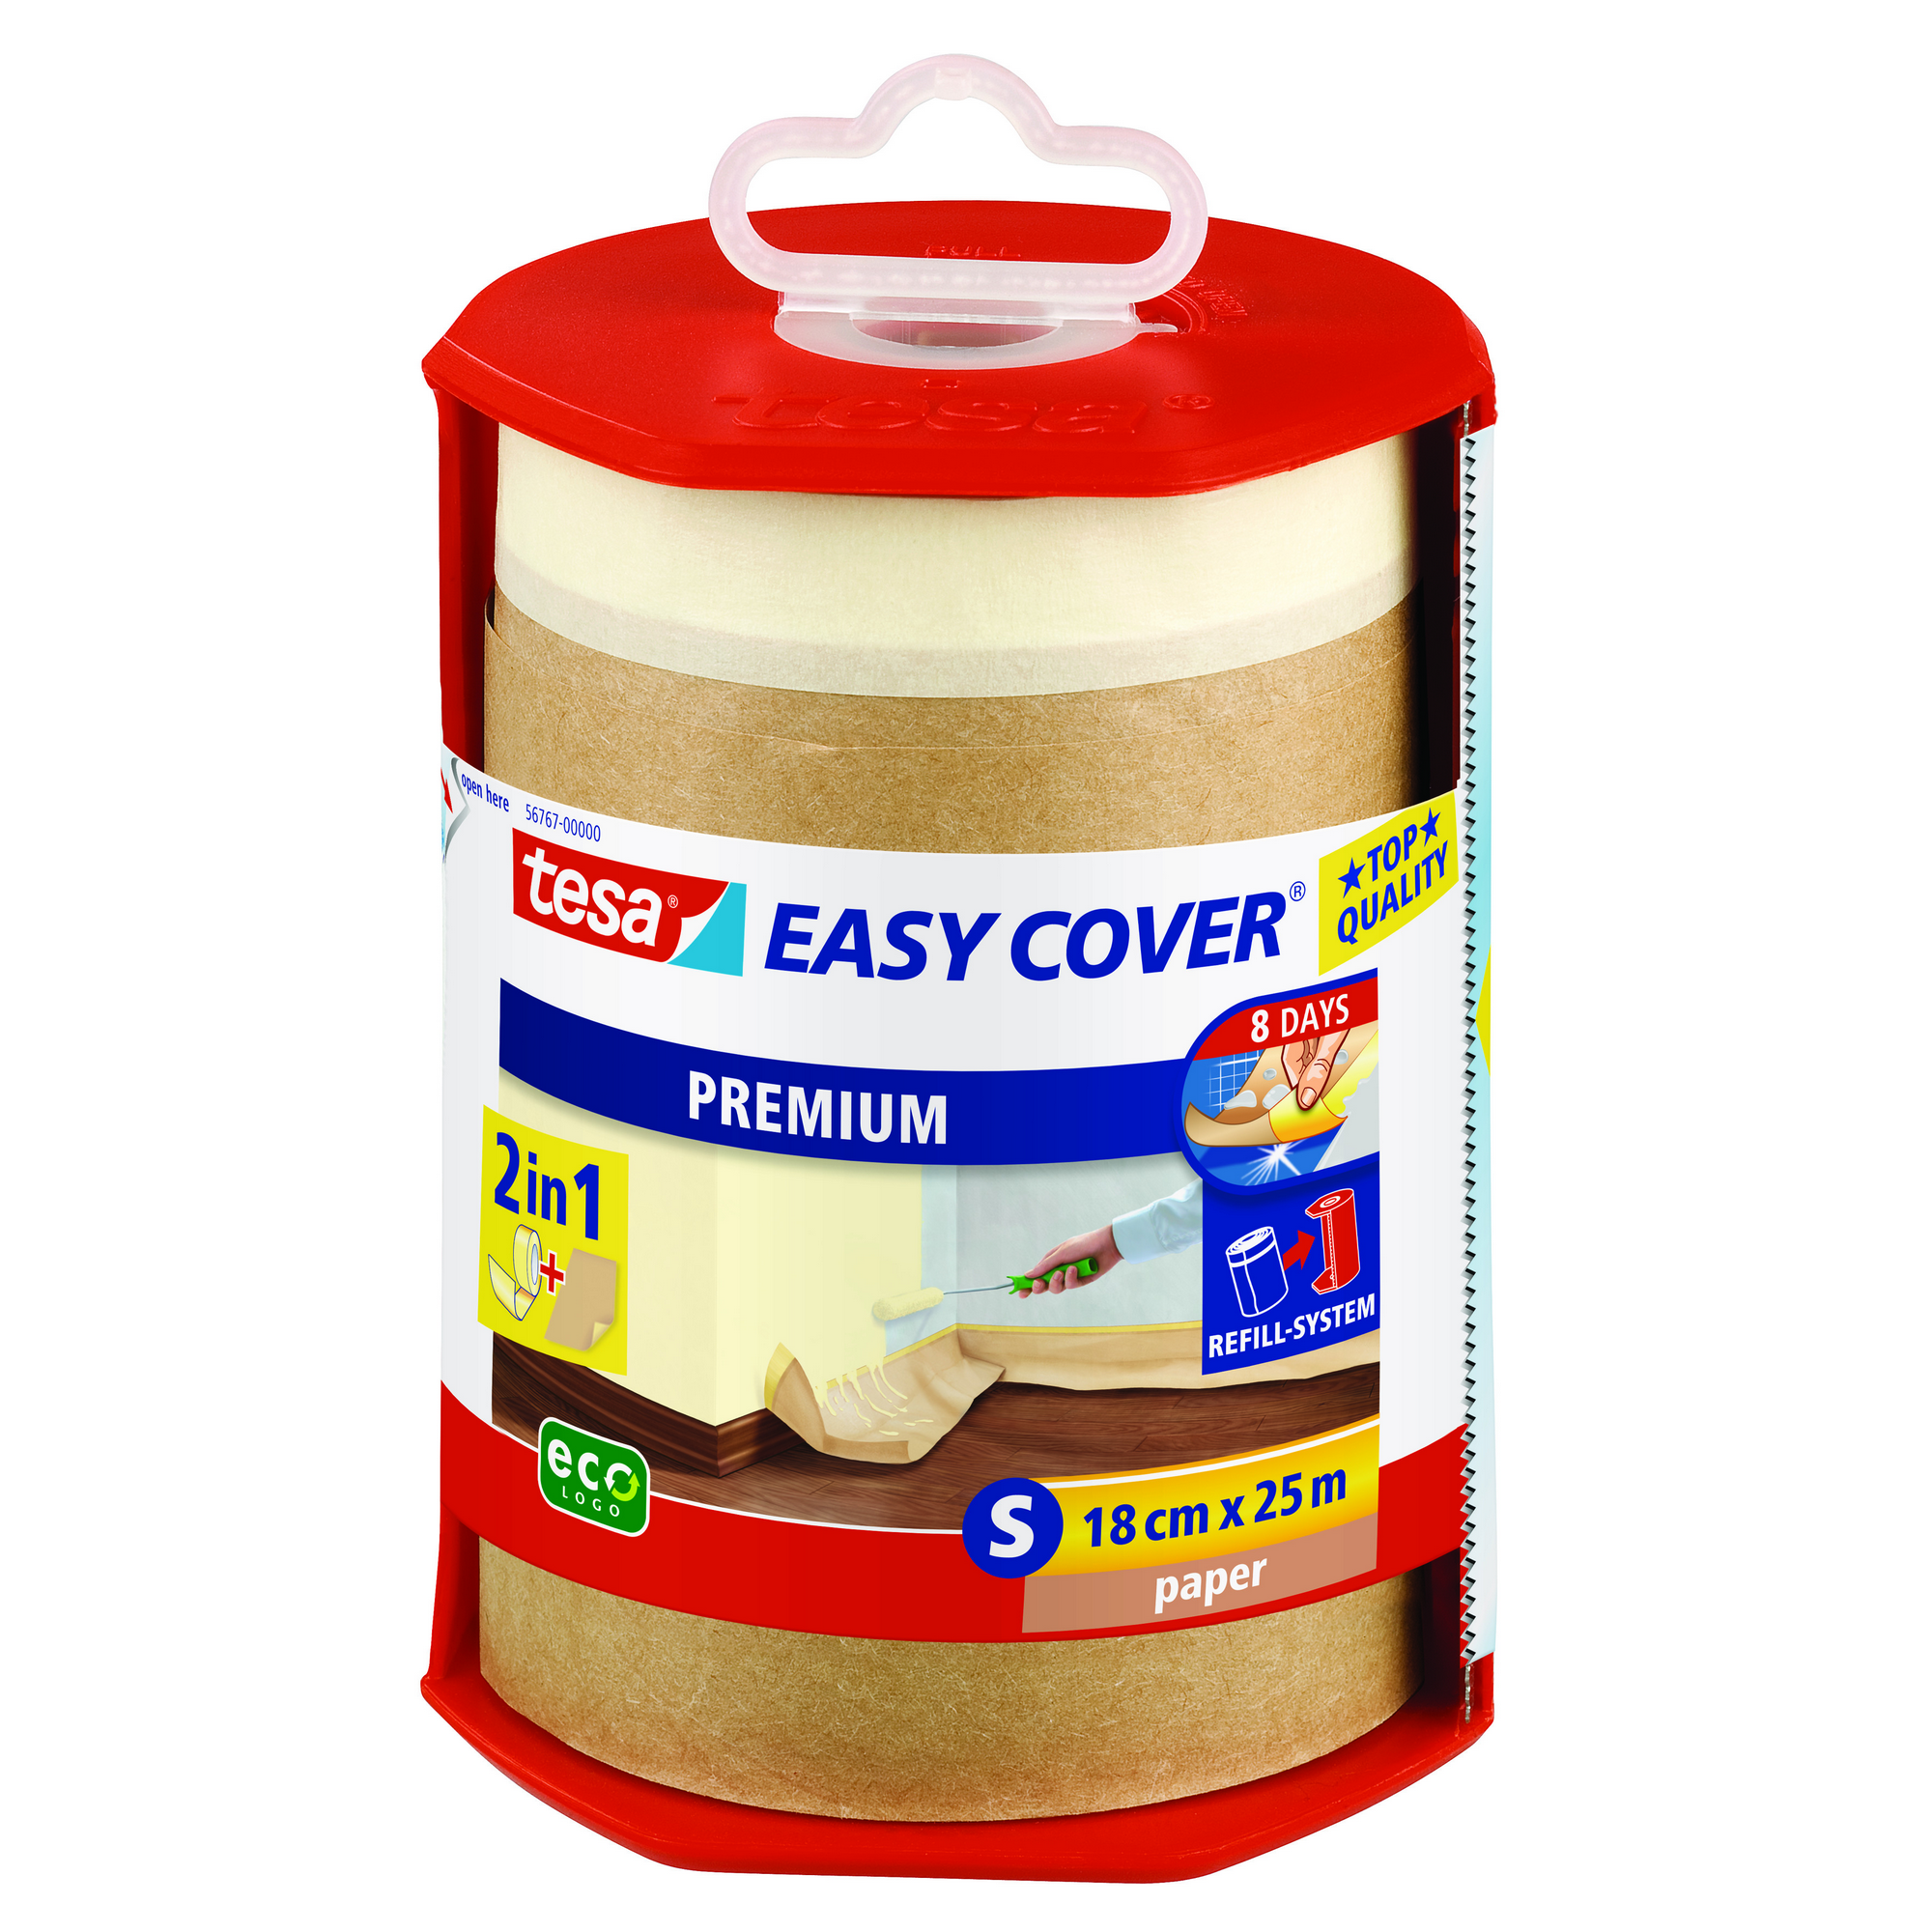 Tesa Papier und Abdeckband „Easy Cover“ im Abroller + product picture